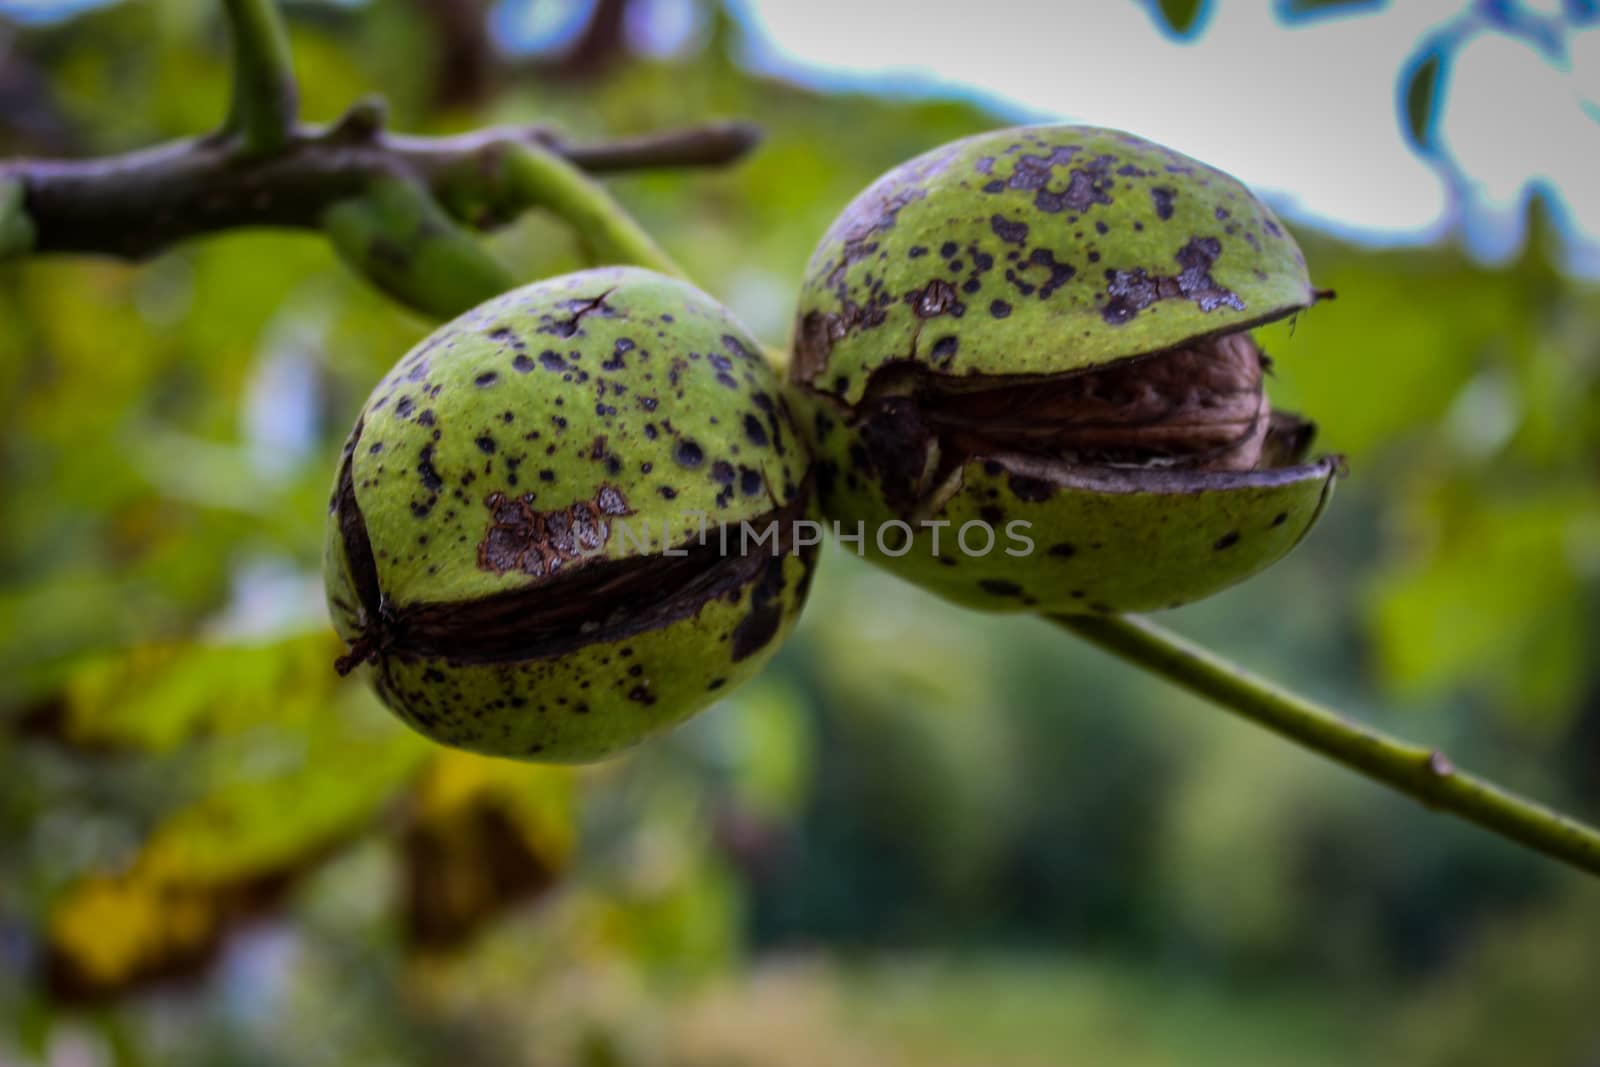 The green shells of the walnuts opened and two ripe walnuts protruded from them. by mahirrov